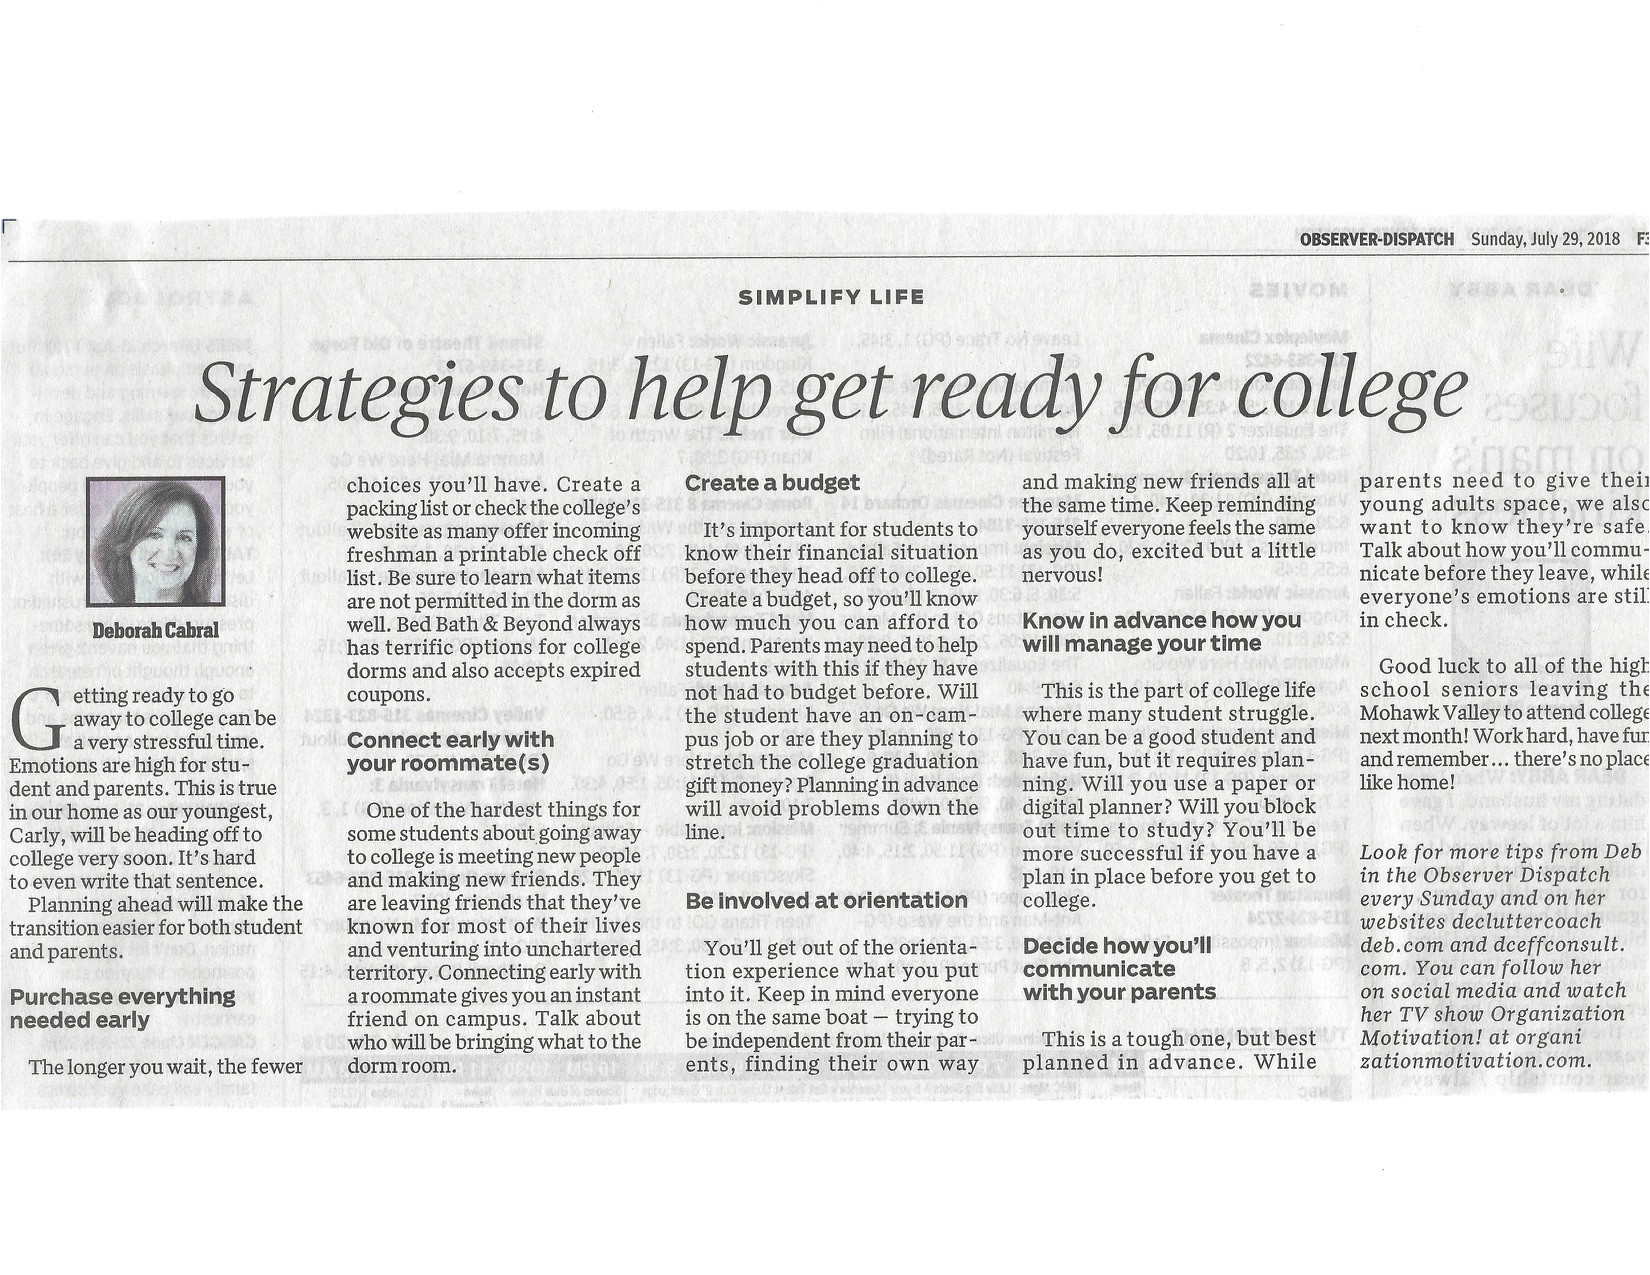 utica observer dispatch utica ny strategies to help get ready for college